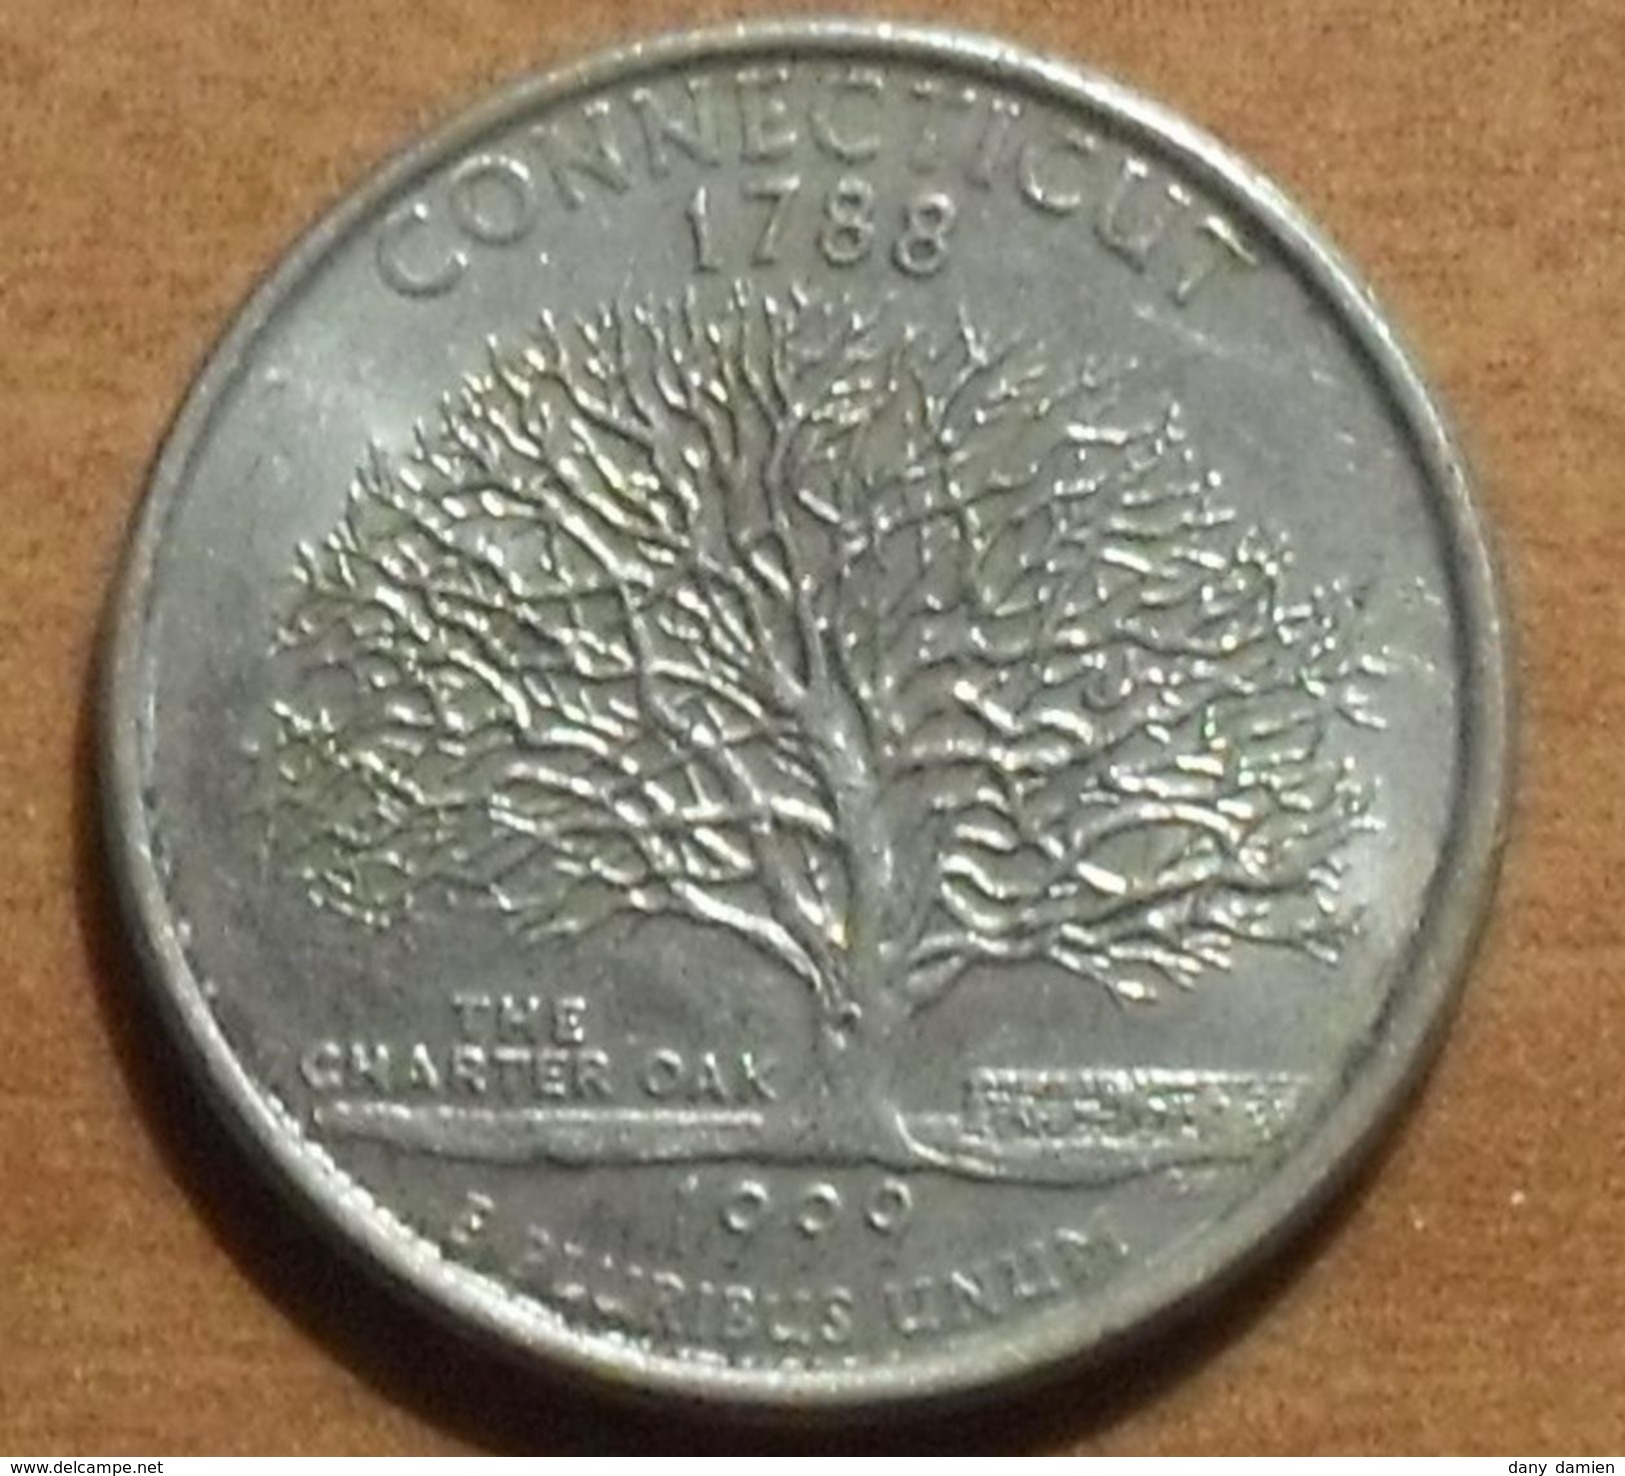 UNITED STATES OF AMERICA - USA - QUARTER DOLLAR - STATE CONNECTICUT (1999) - Collections